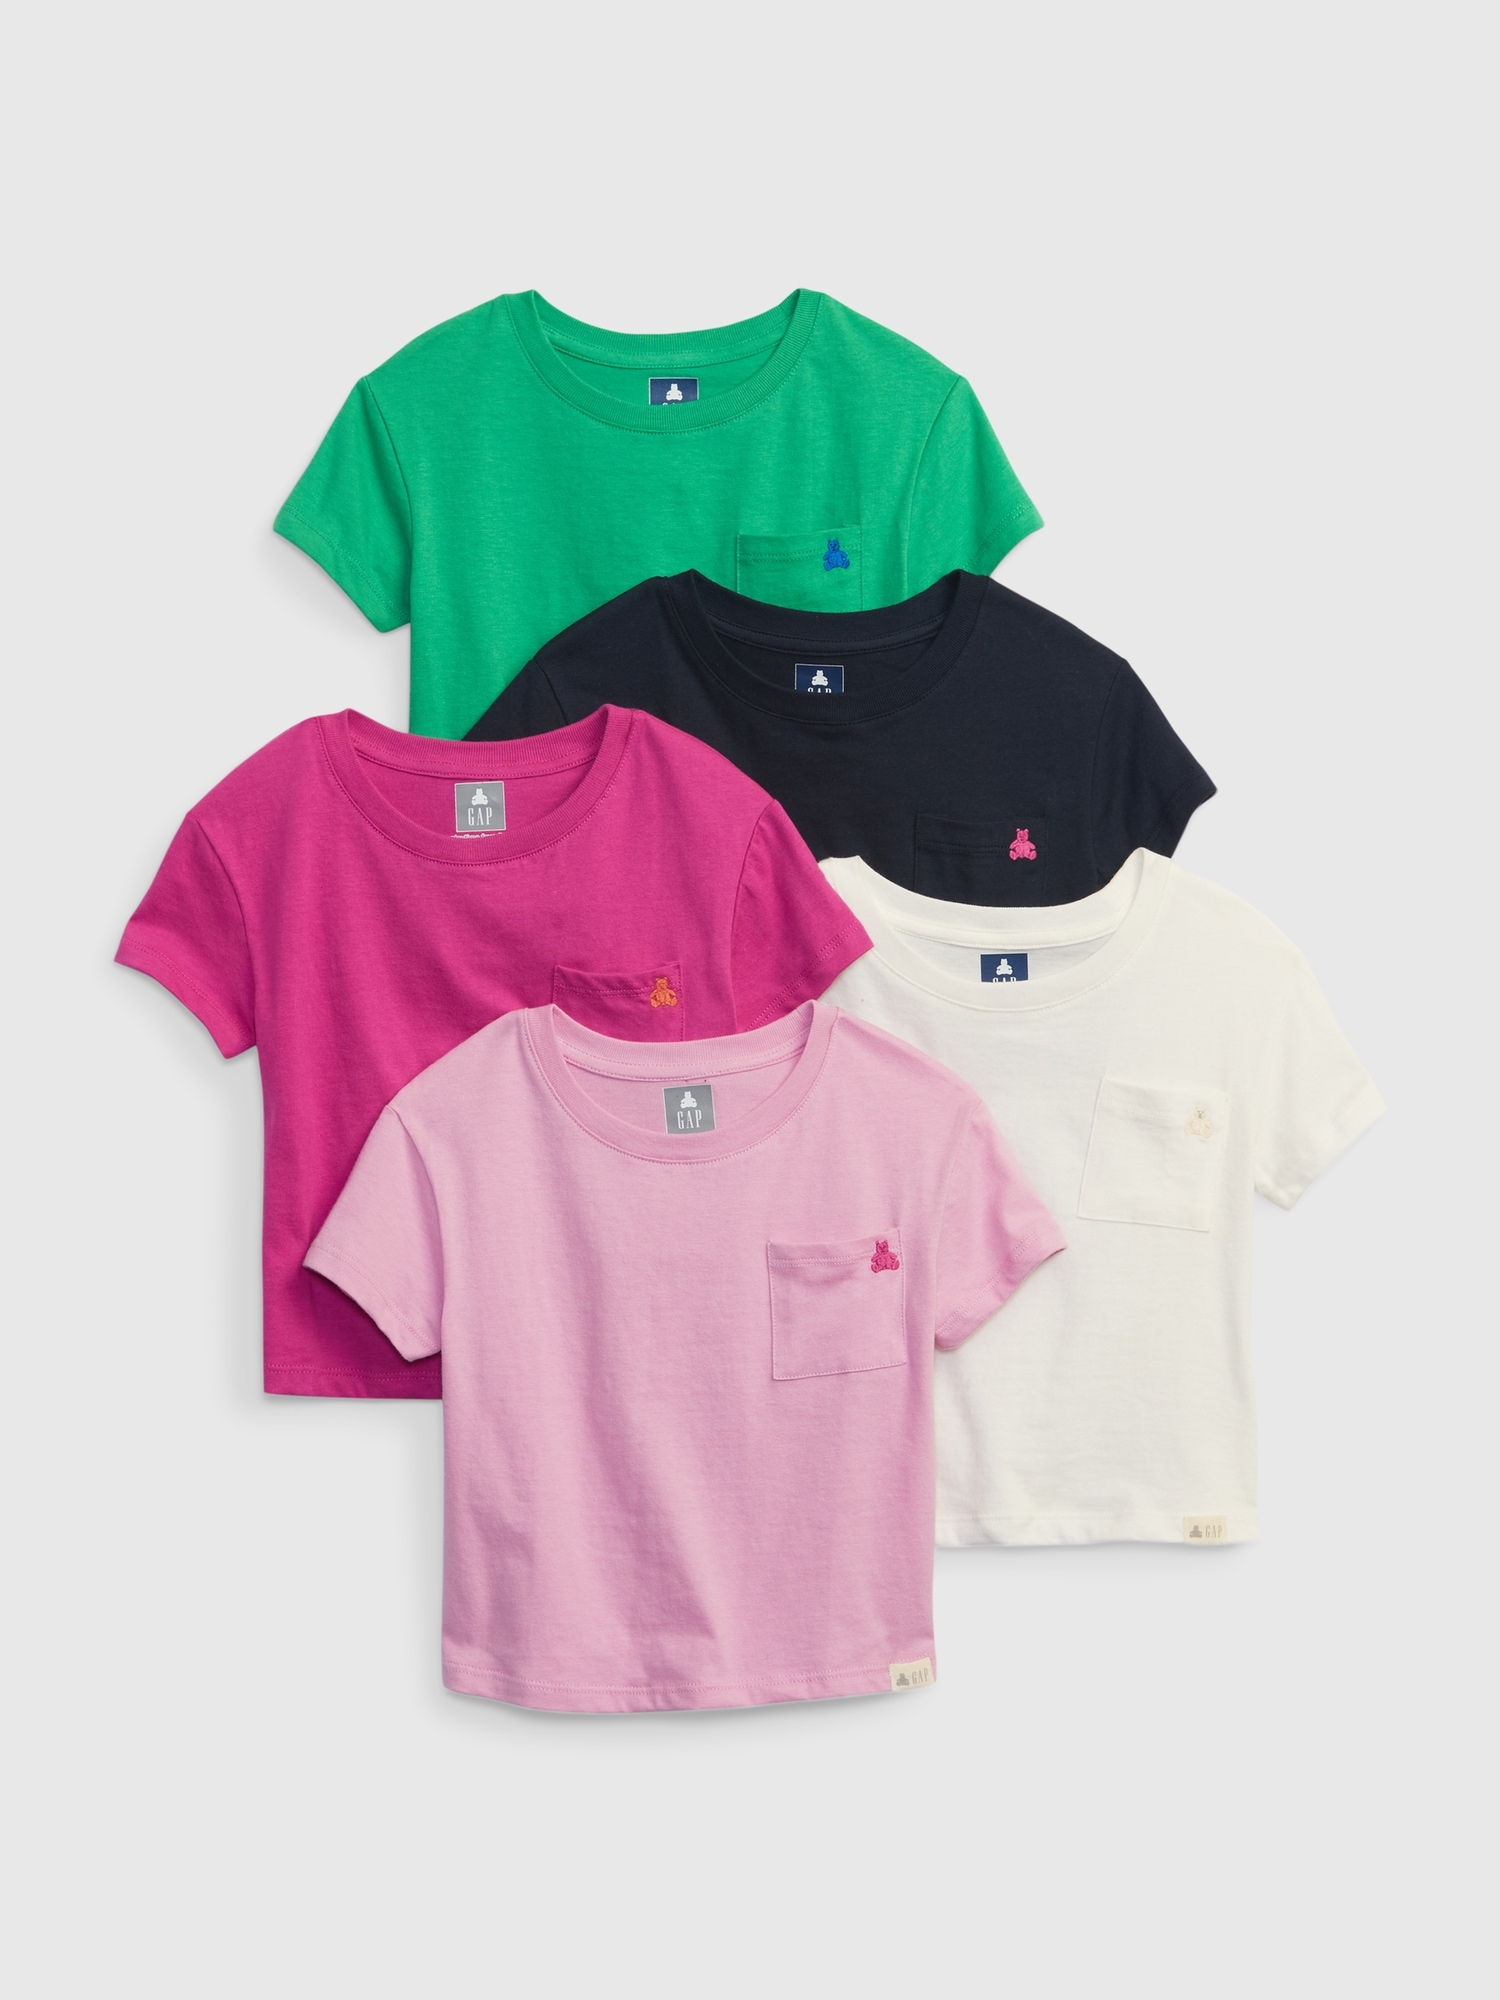 40% Off Solid Toddler Tee - Soft Pink - 2T Regular $25. NOW - Green Label  Organic